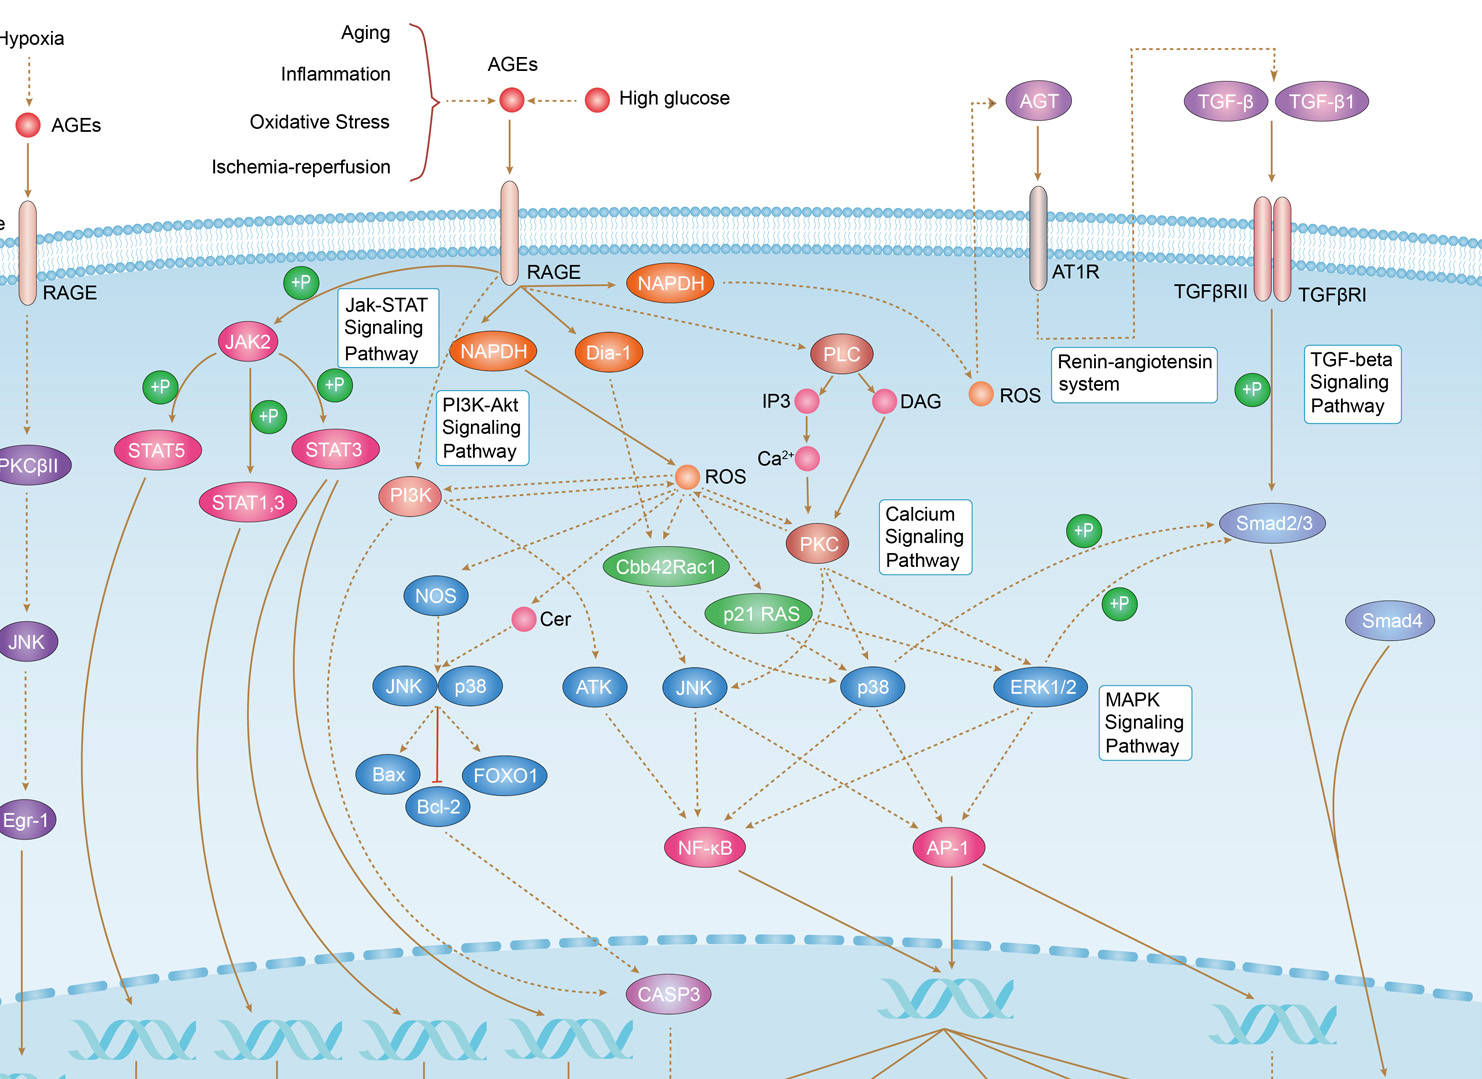 AGE RAGE Signaling Pathway in  Diabetic Complications